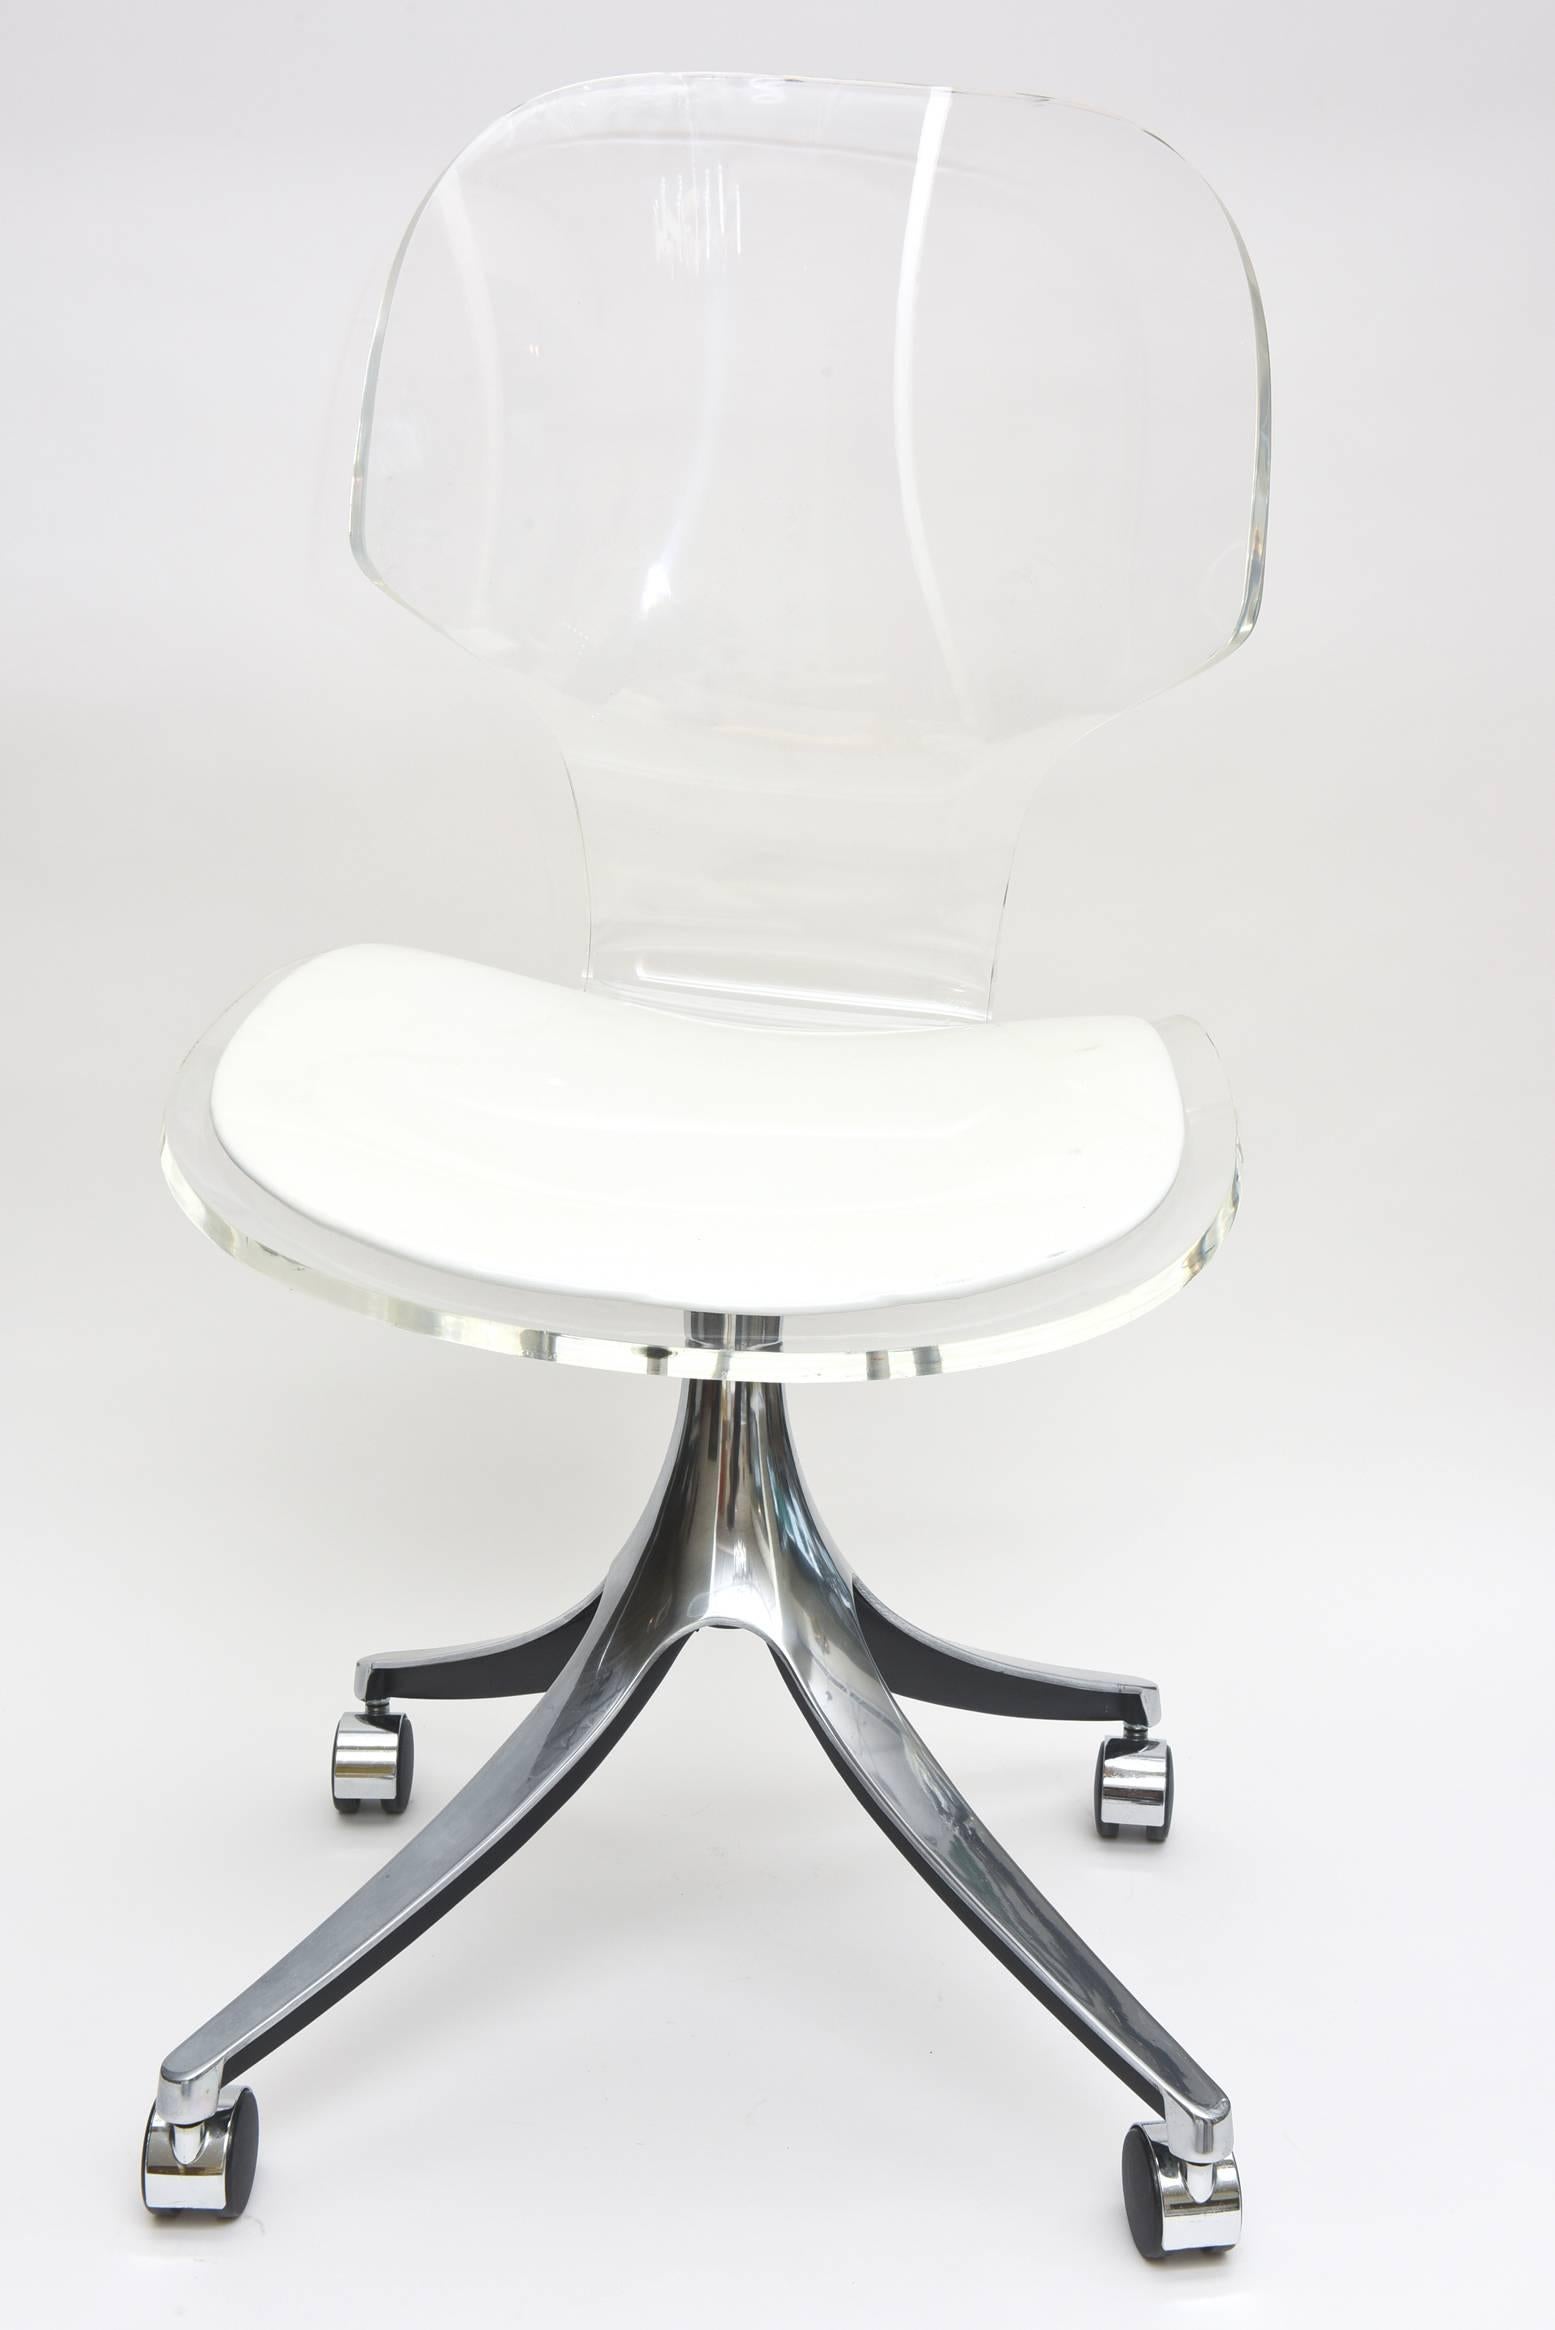 This very comfortable and vintage chic polished Lucite, chrome and original white vinyl desk/vanity chair has it's original wheels.
It moves easily.
The white vinyl seat is original. One may want to change that.